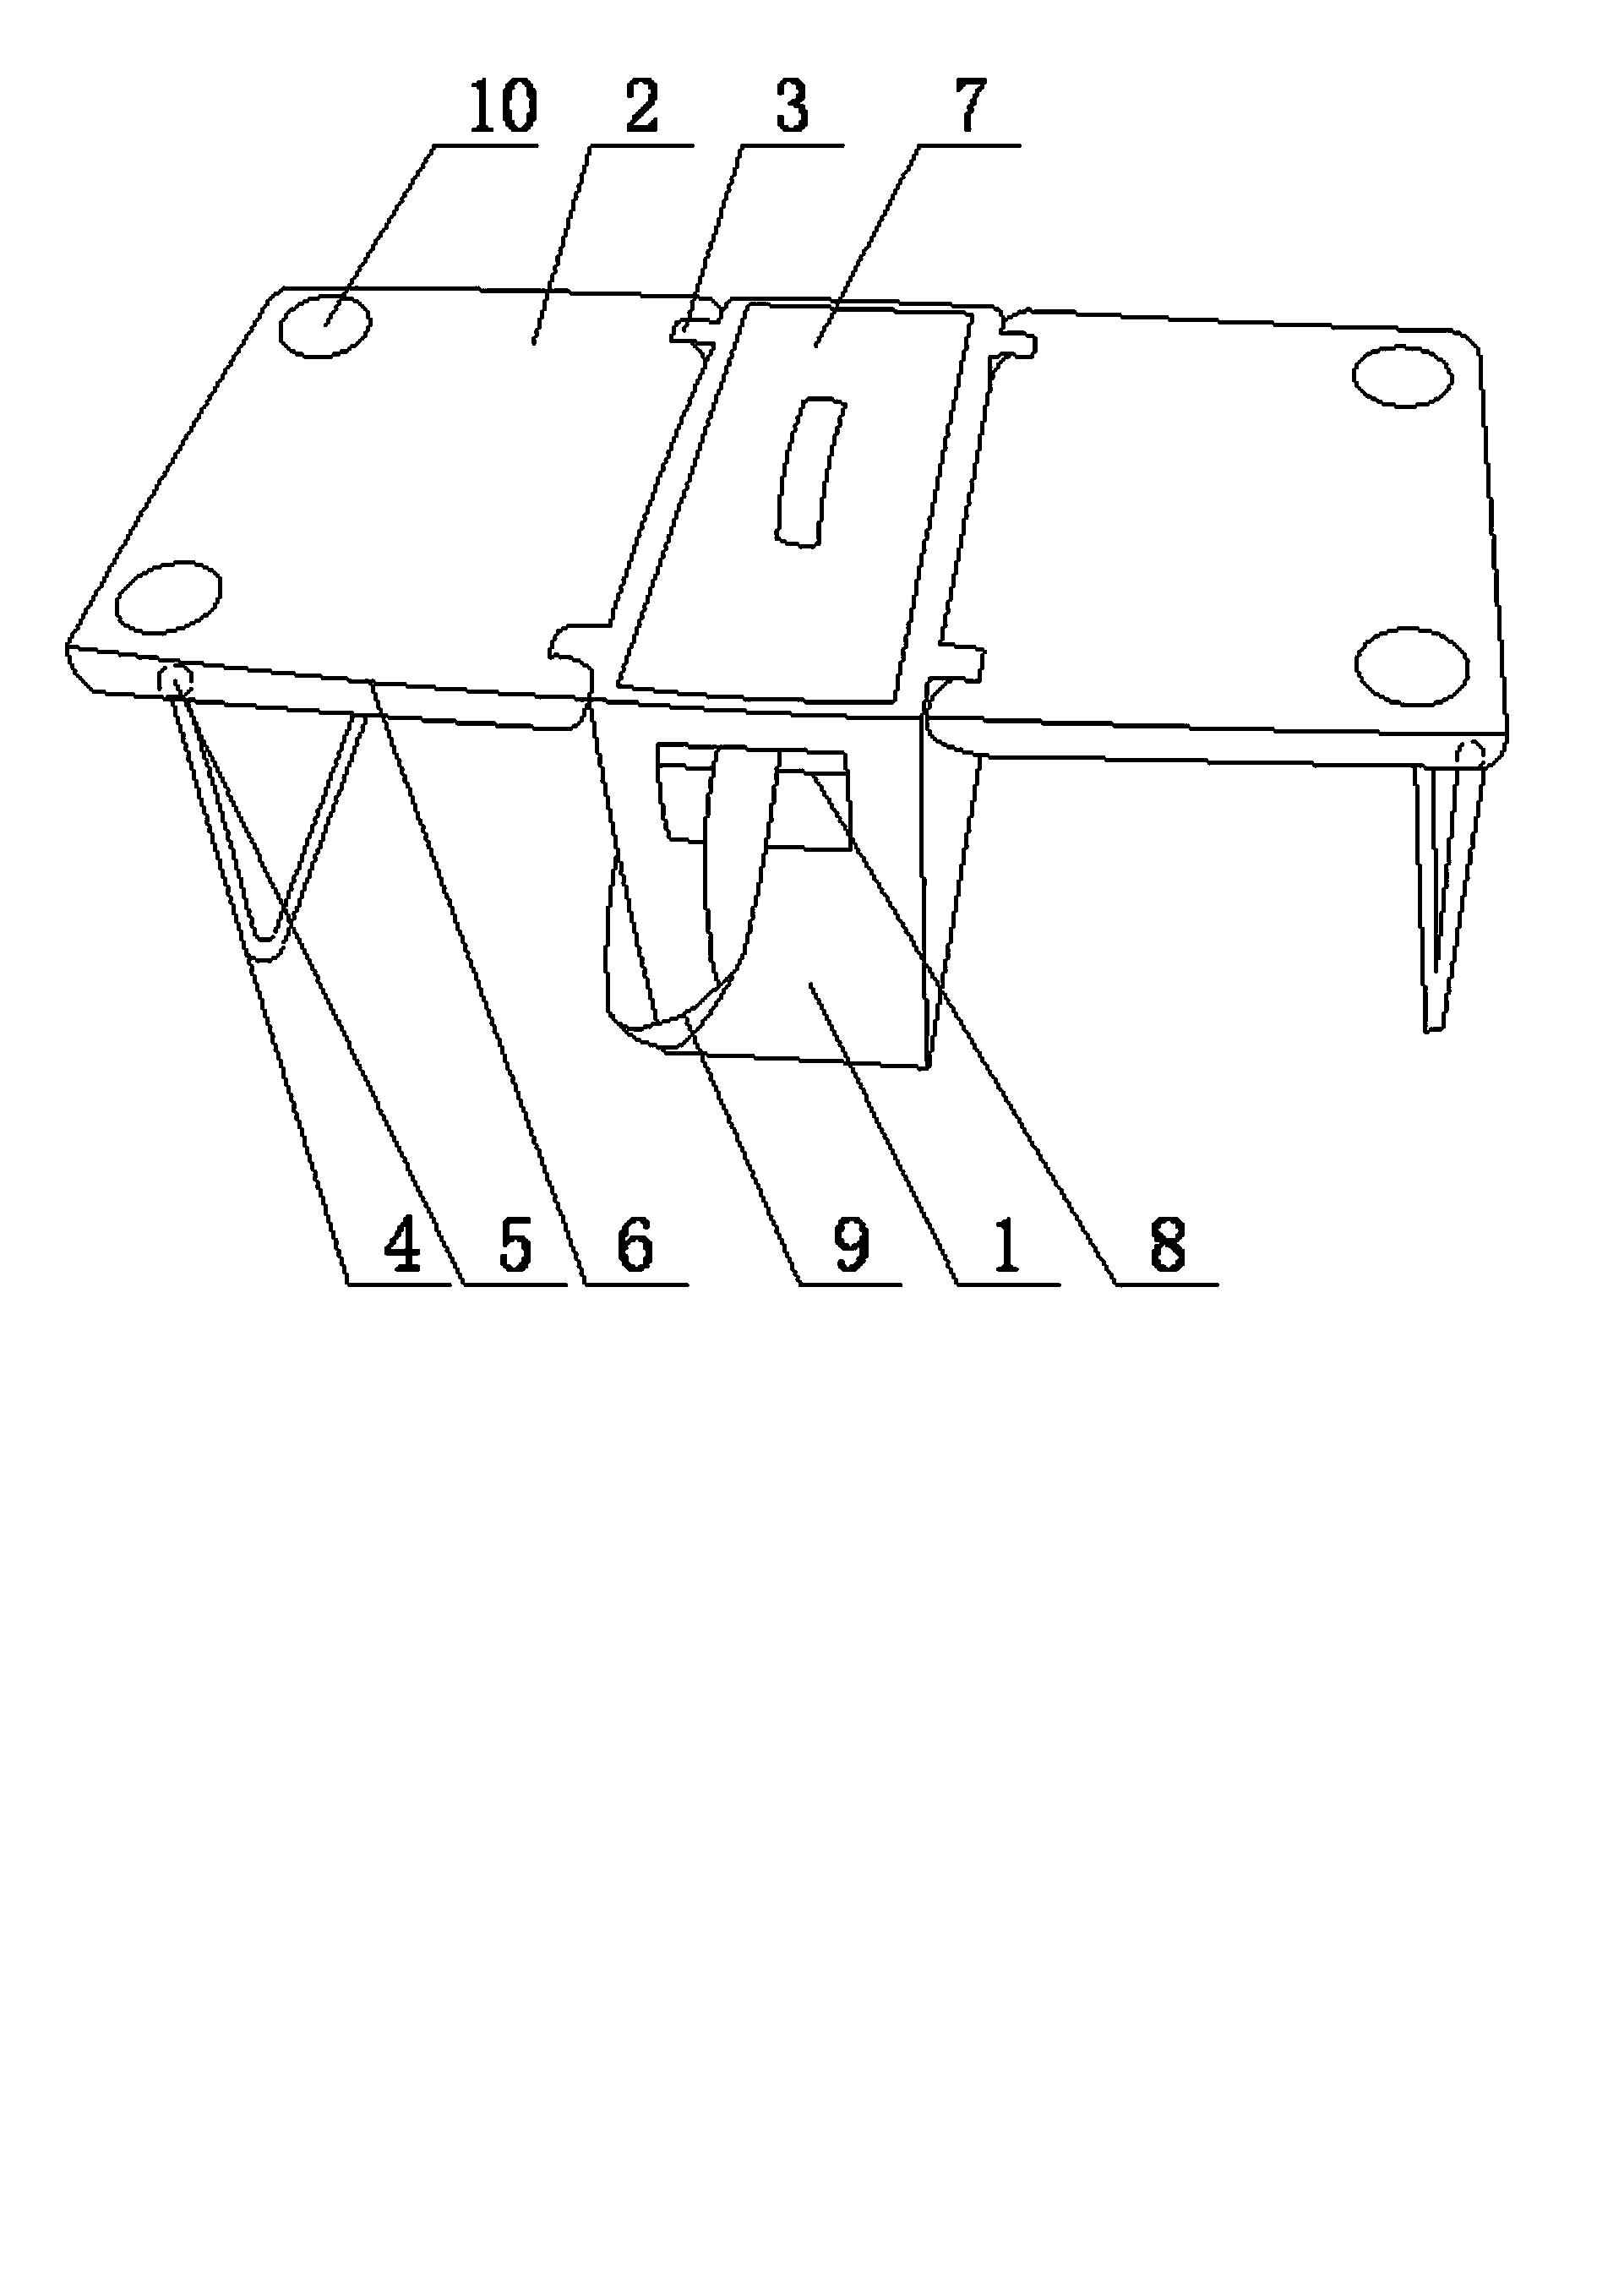 Case capable of serving as table